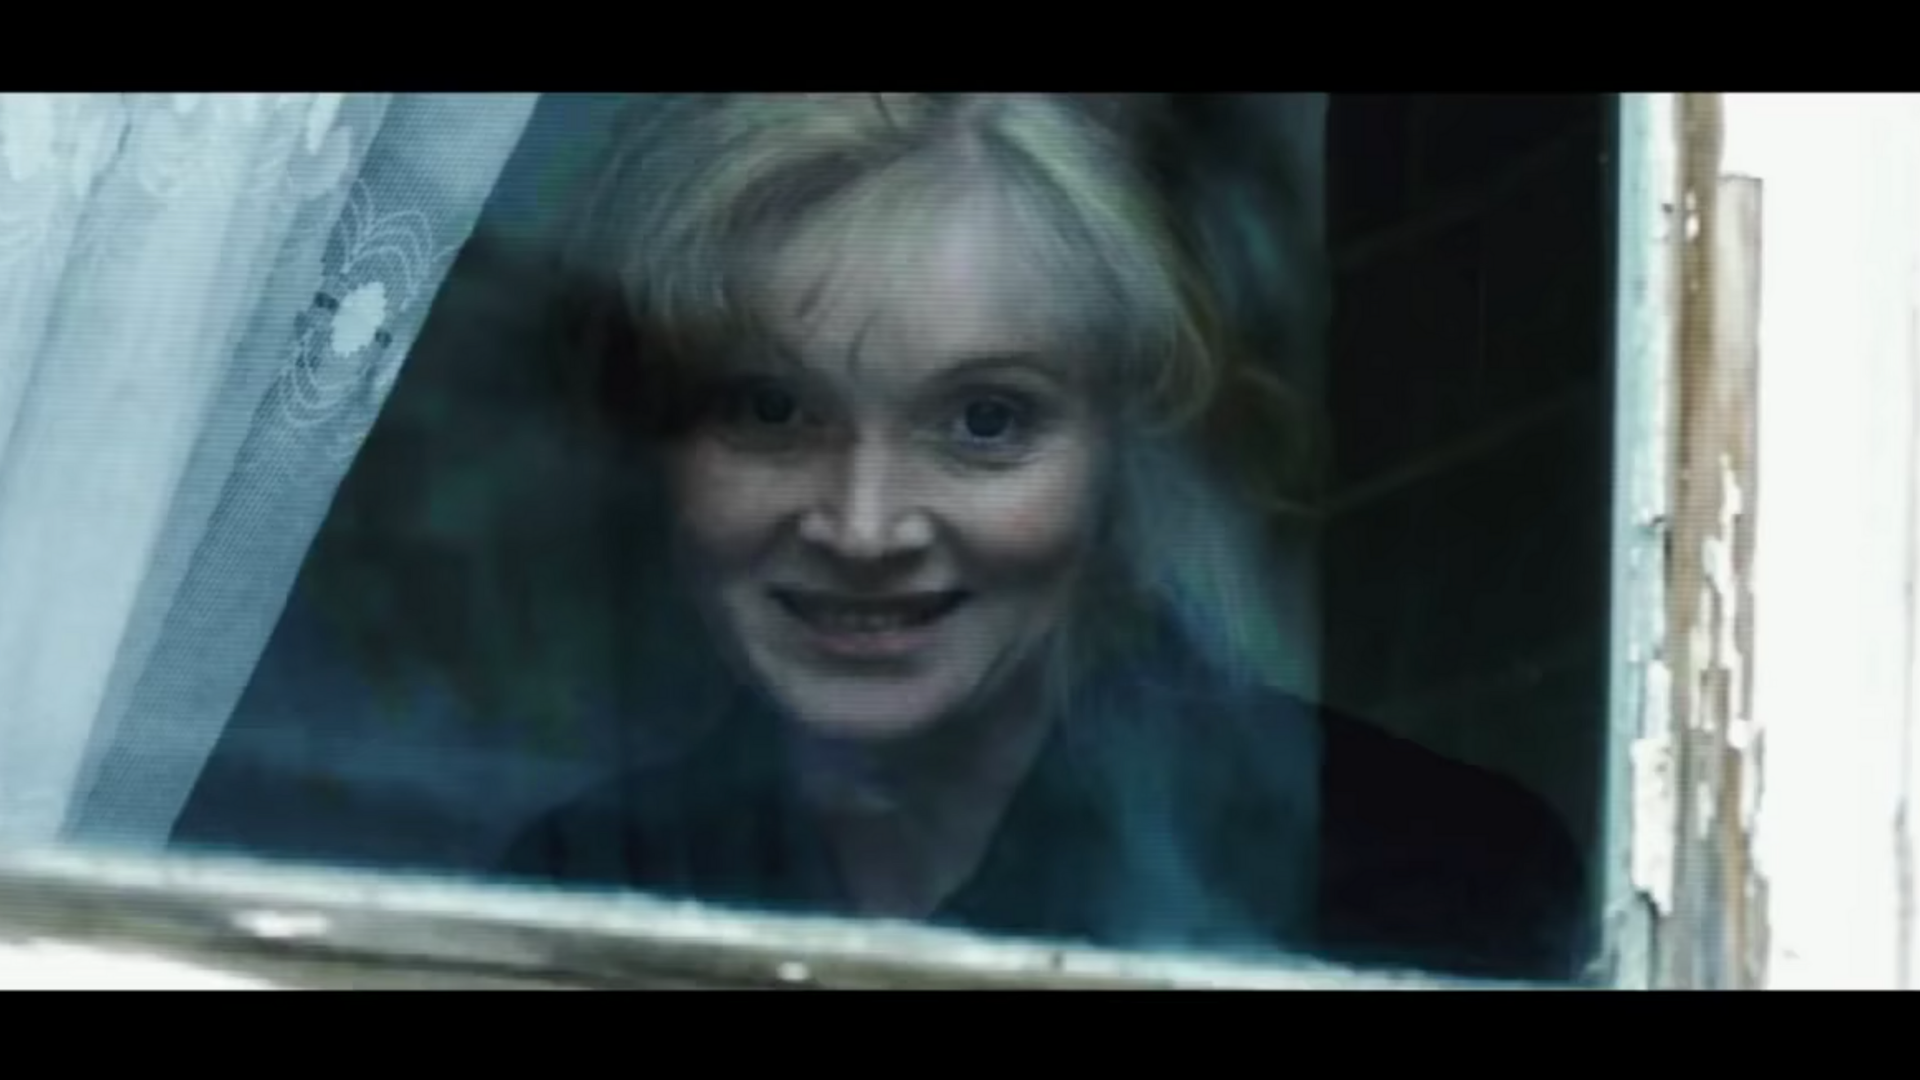 Amelia in The Babadook